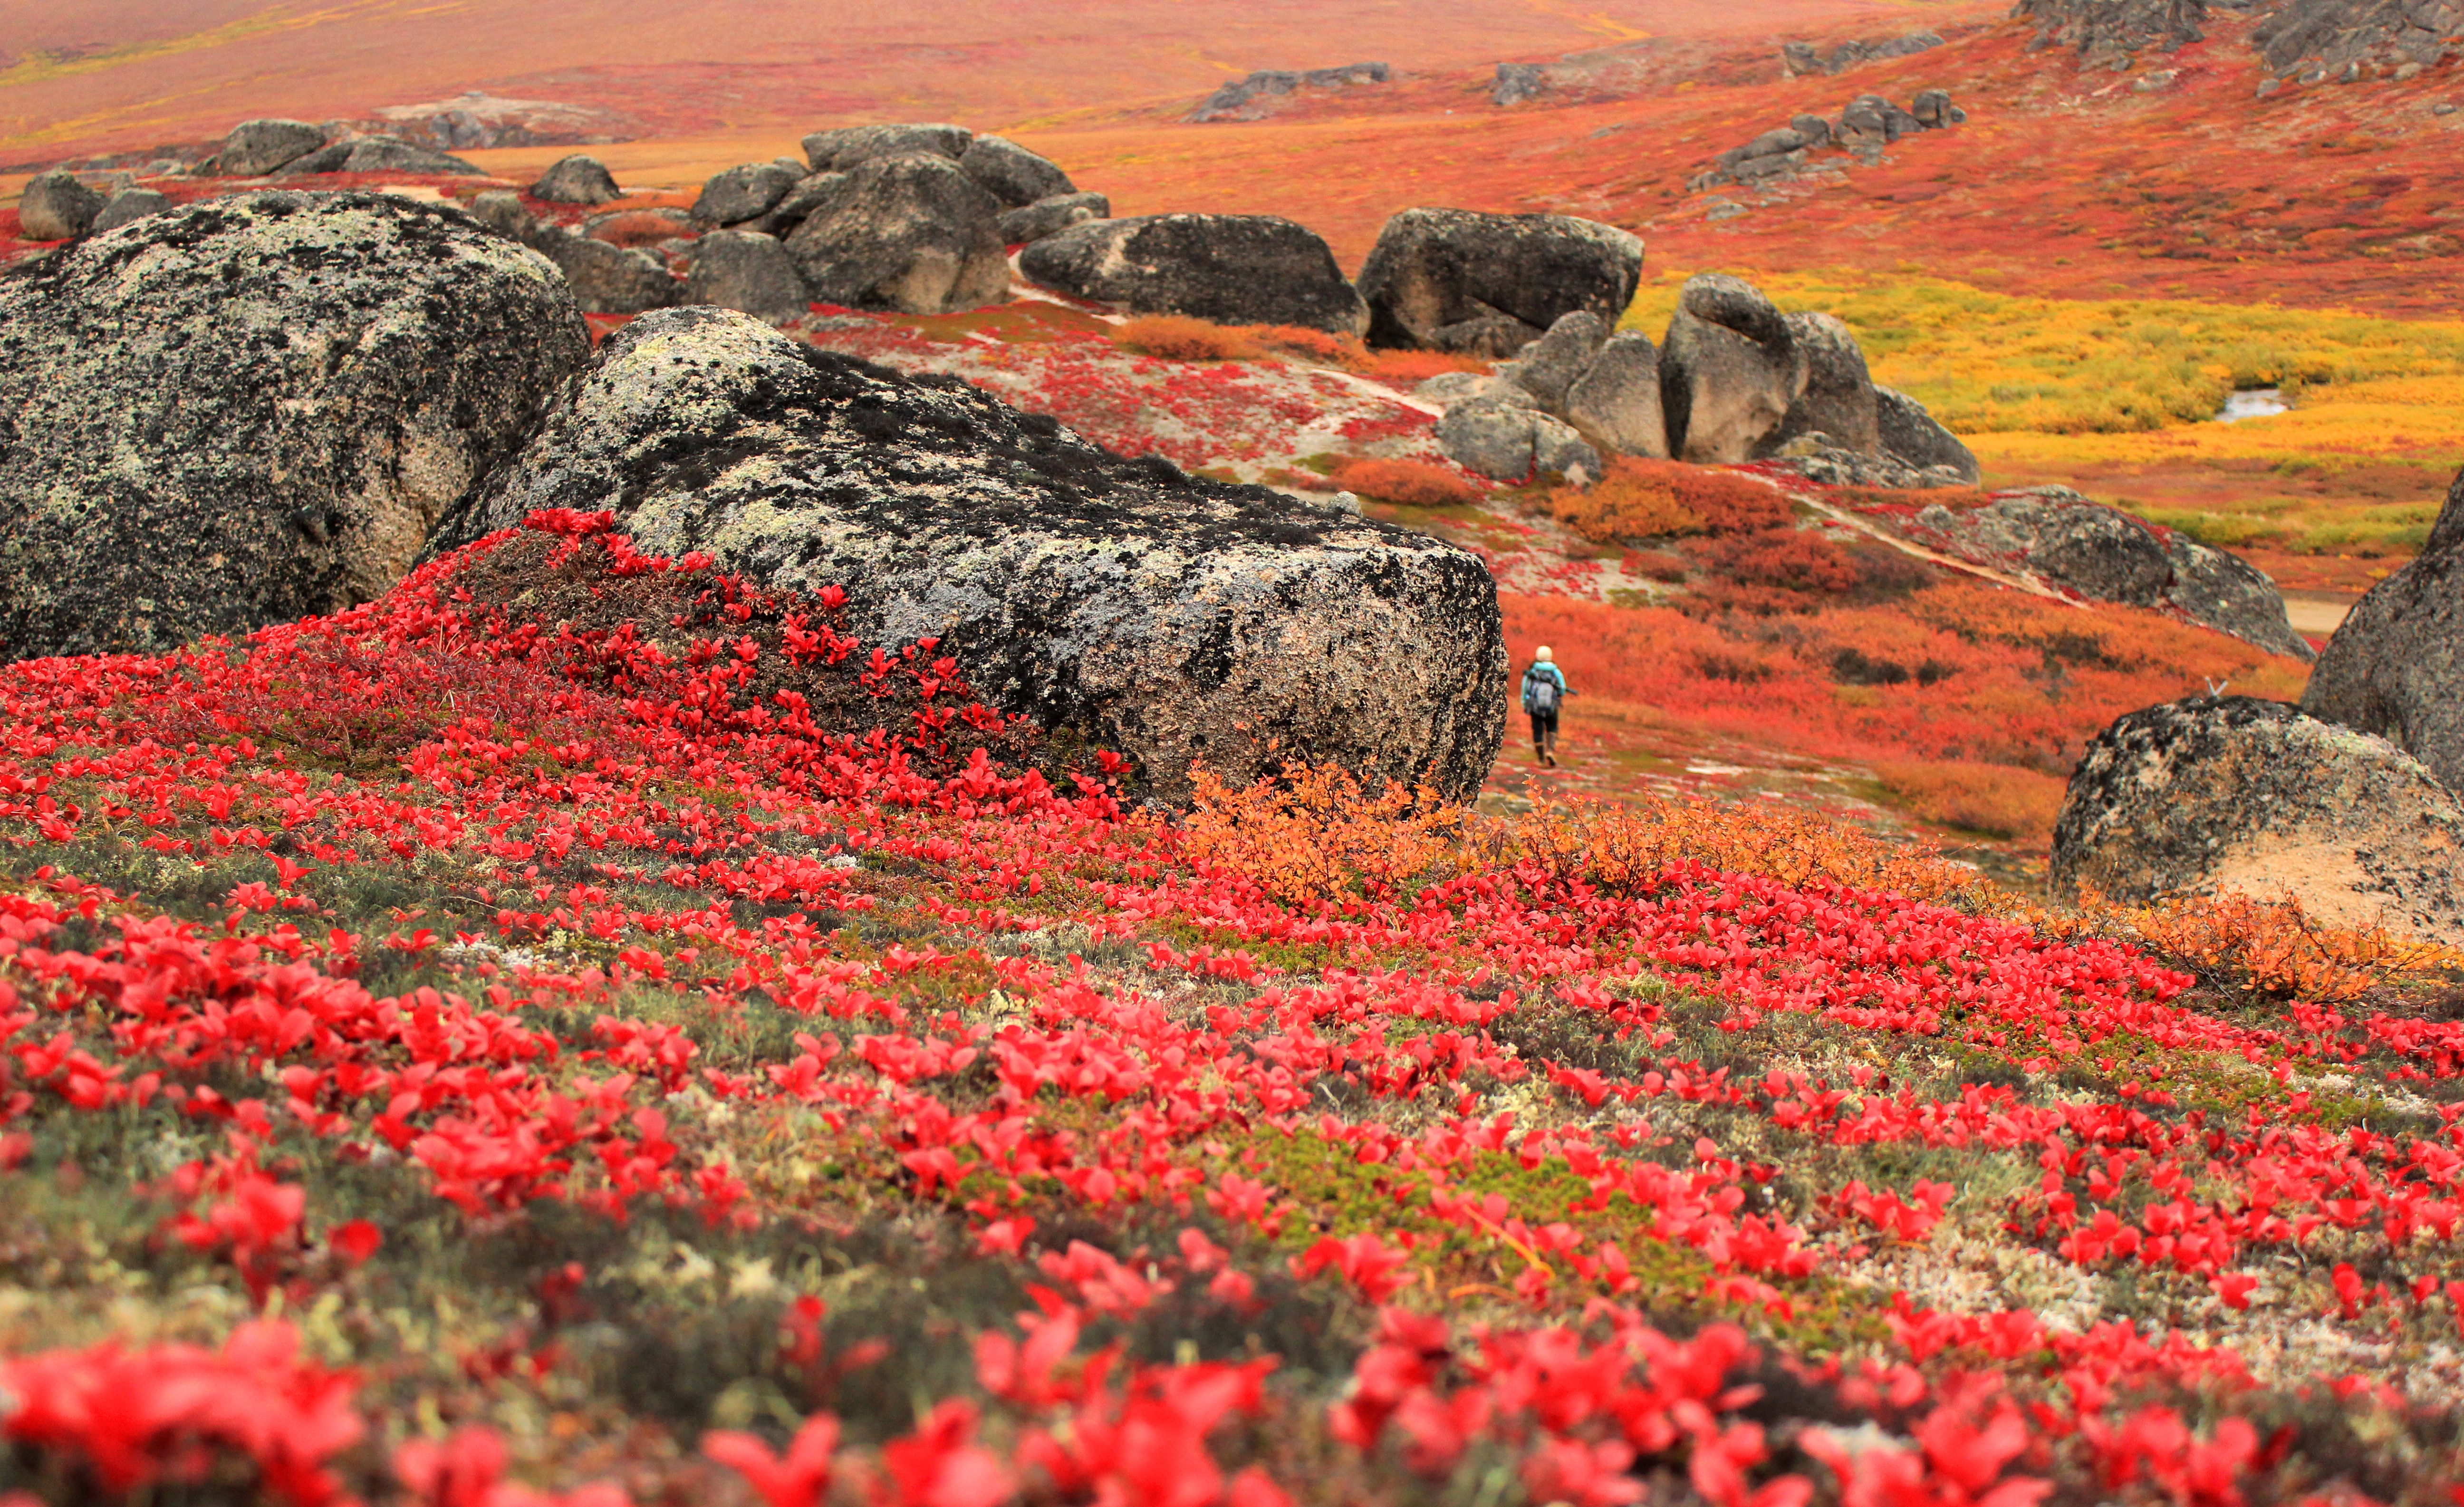 A hiker is seen in the distance as autumn colors dominate the tundra landscape.